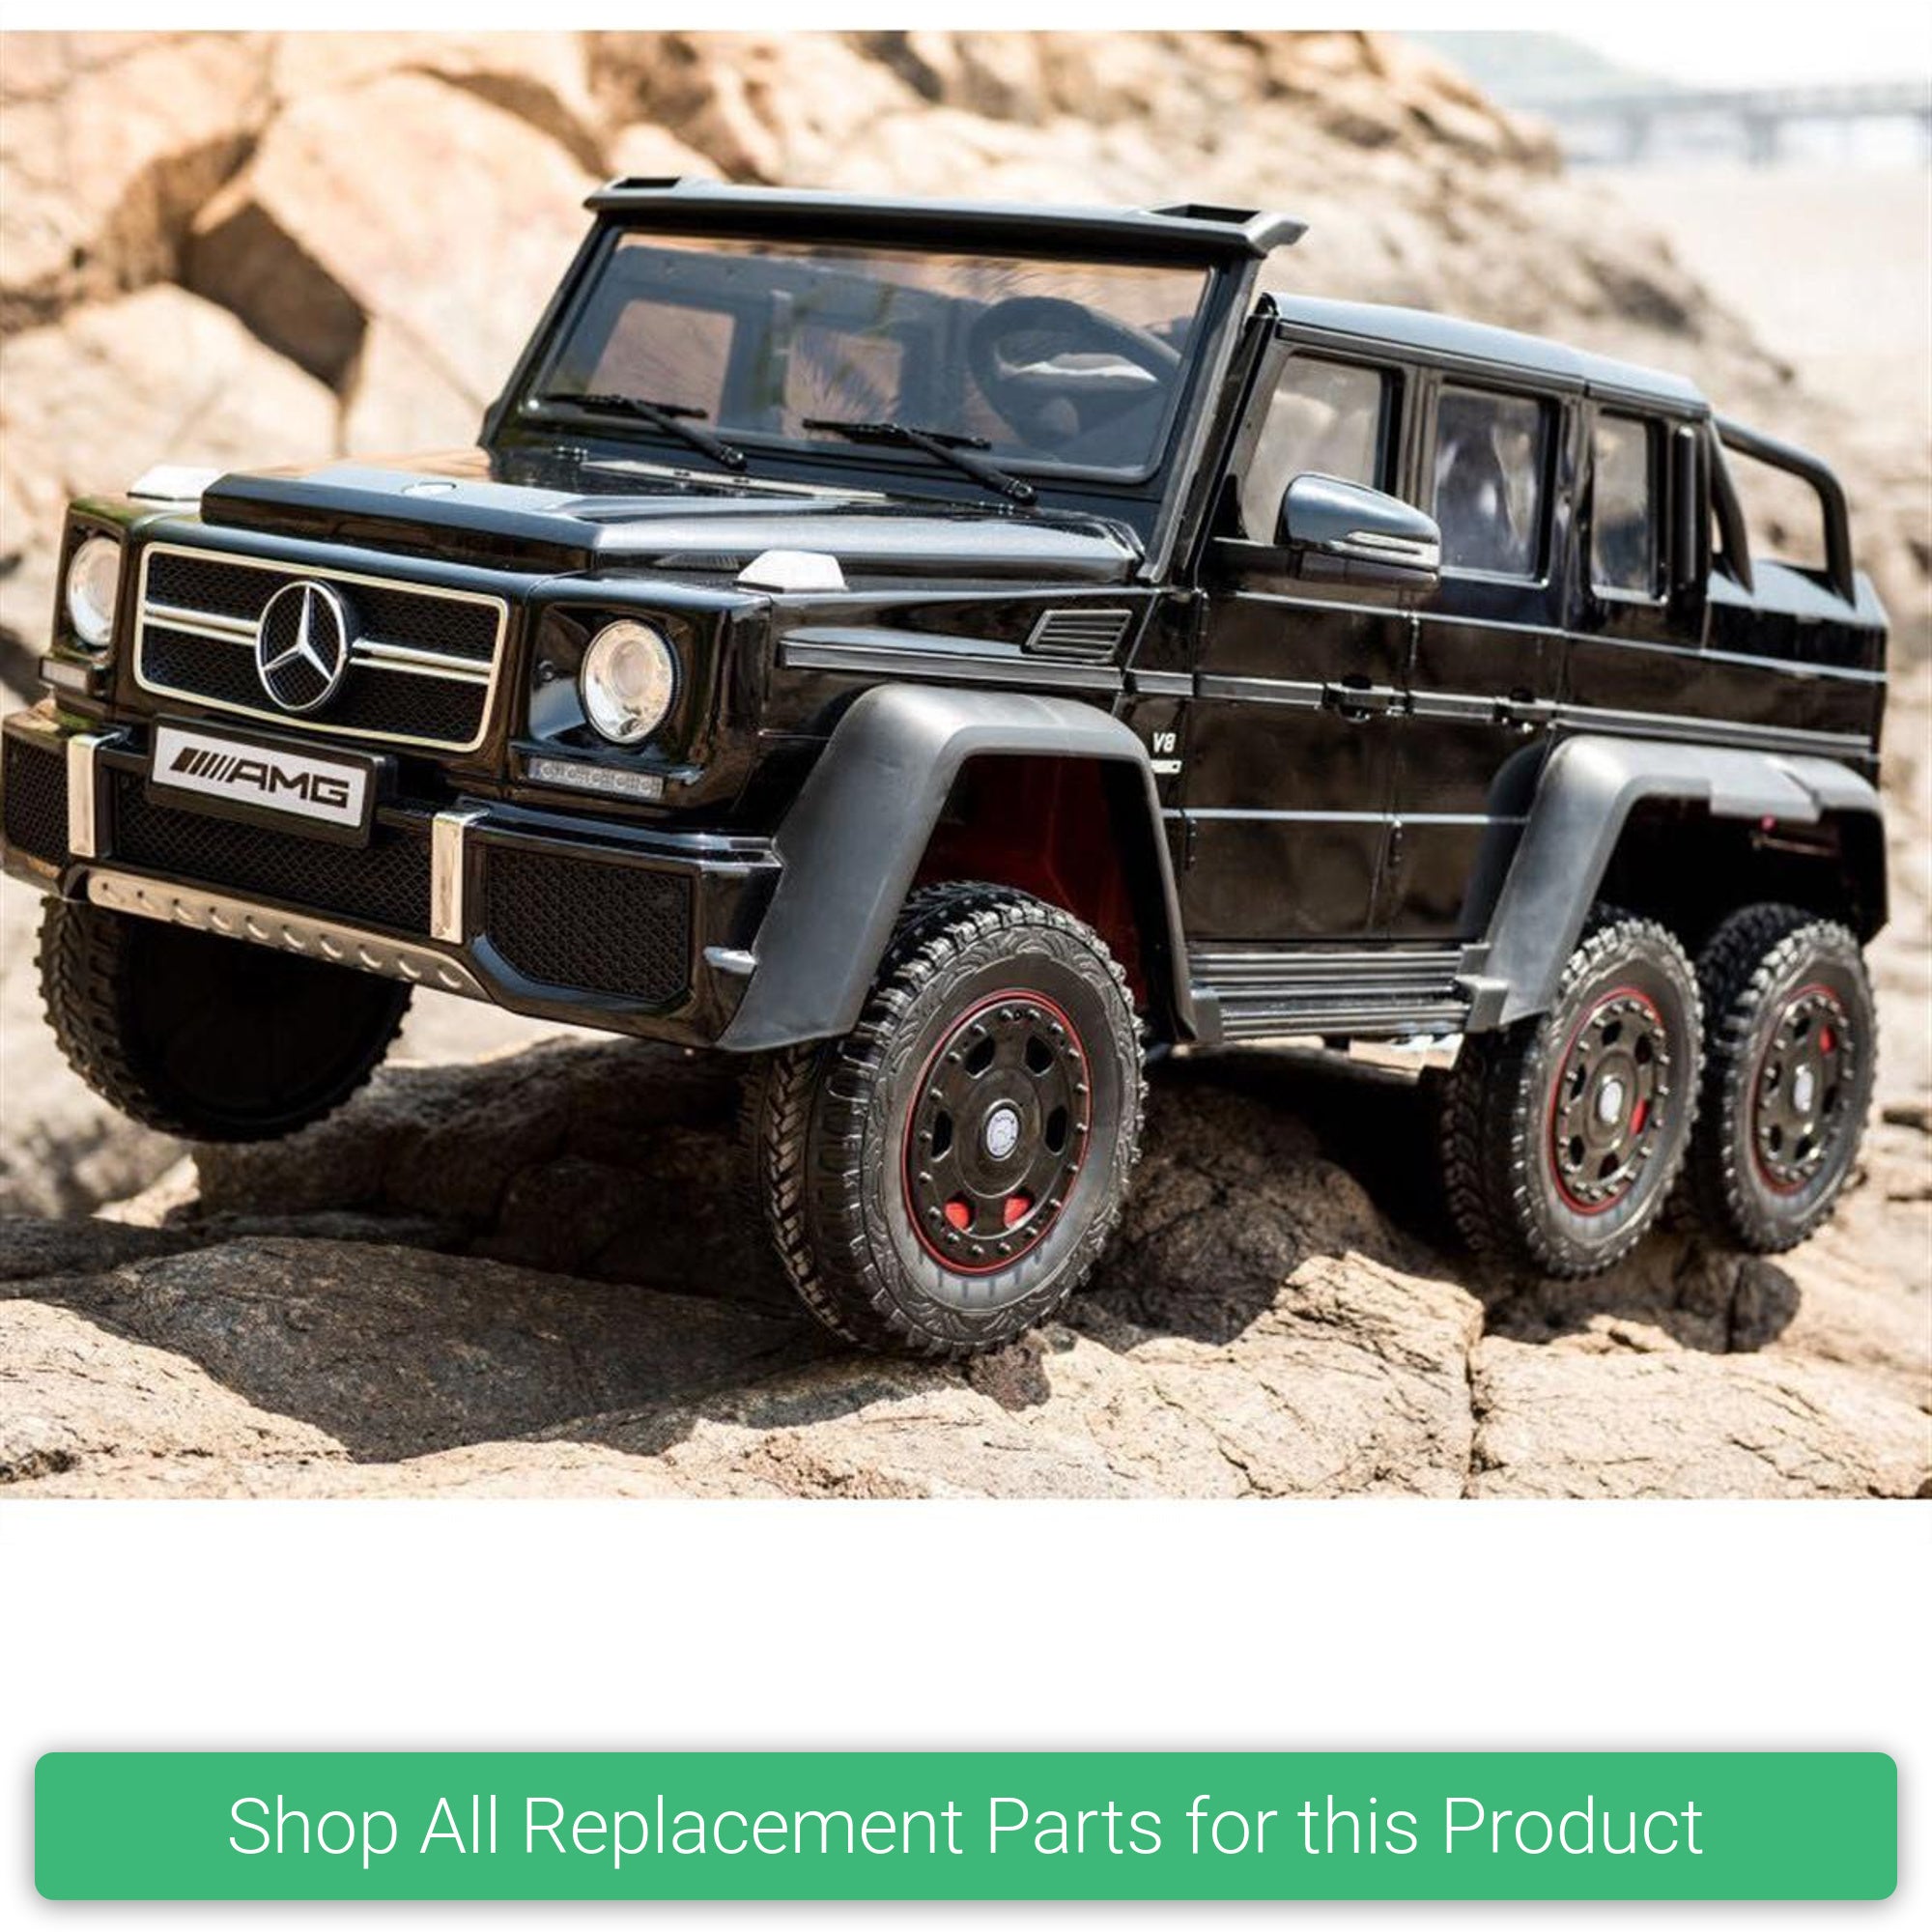 Replacement Parts and Spares for Kids Mercedes G63 6X6 - Mini - MIN-6X6-BLK - DMD-318